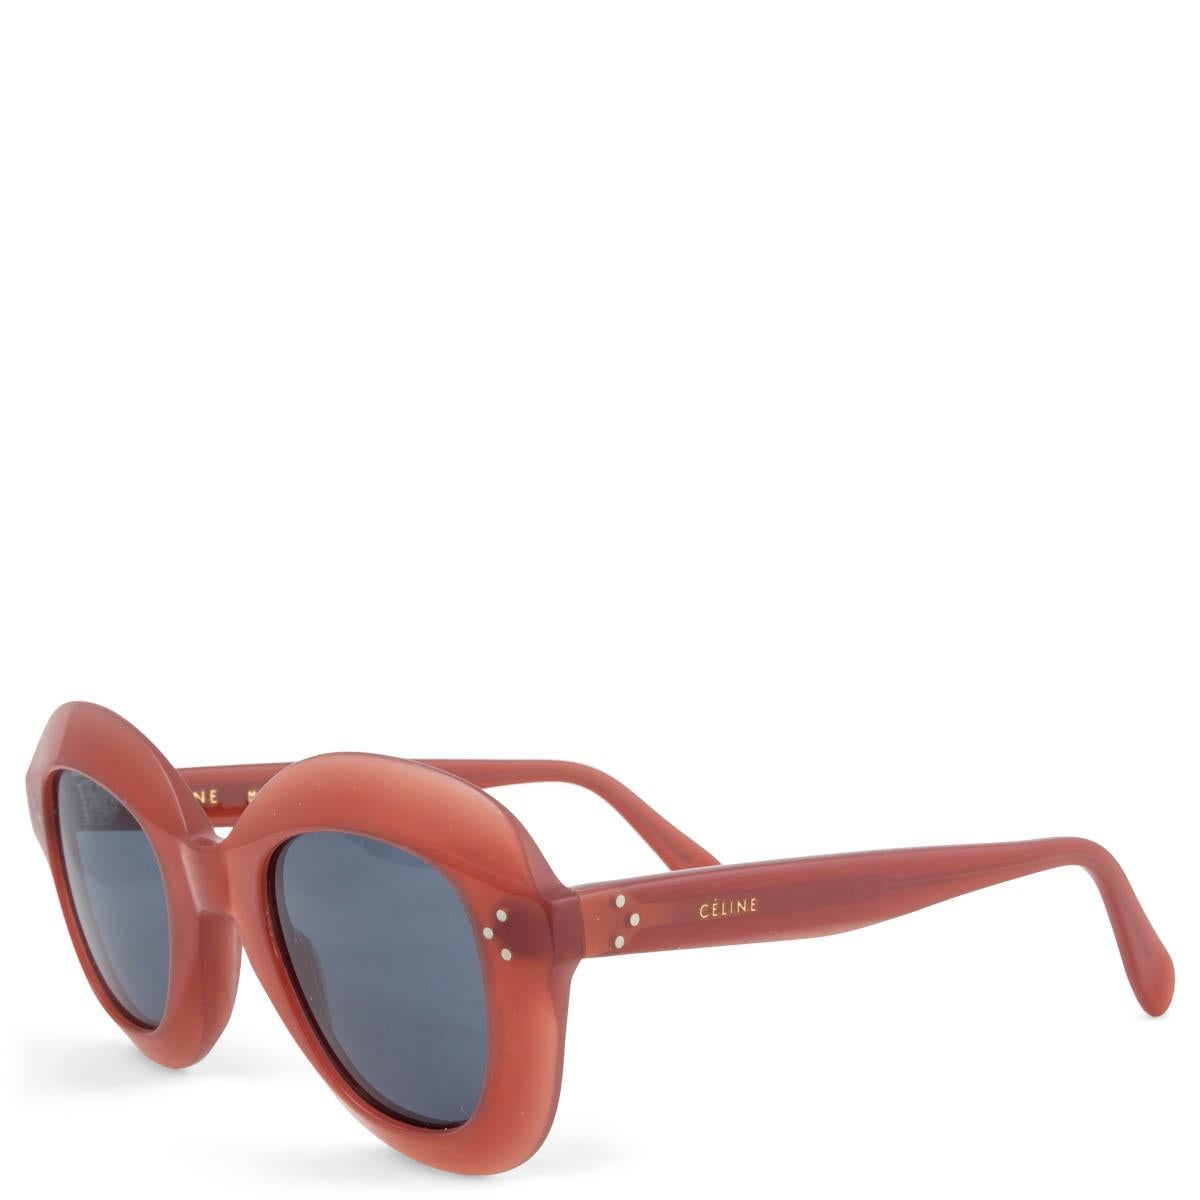 100% authentic Céline CL41445/S Lola oval sunglasses in burnt orange acetate with grey lenses. Have been worn and show a very faint scratch on the right lens. Overall in excellent condition. Come with case. 

Measurements
Model	CL41445/S 
Width	14cm